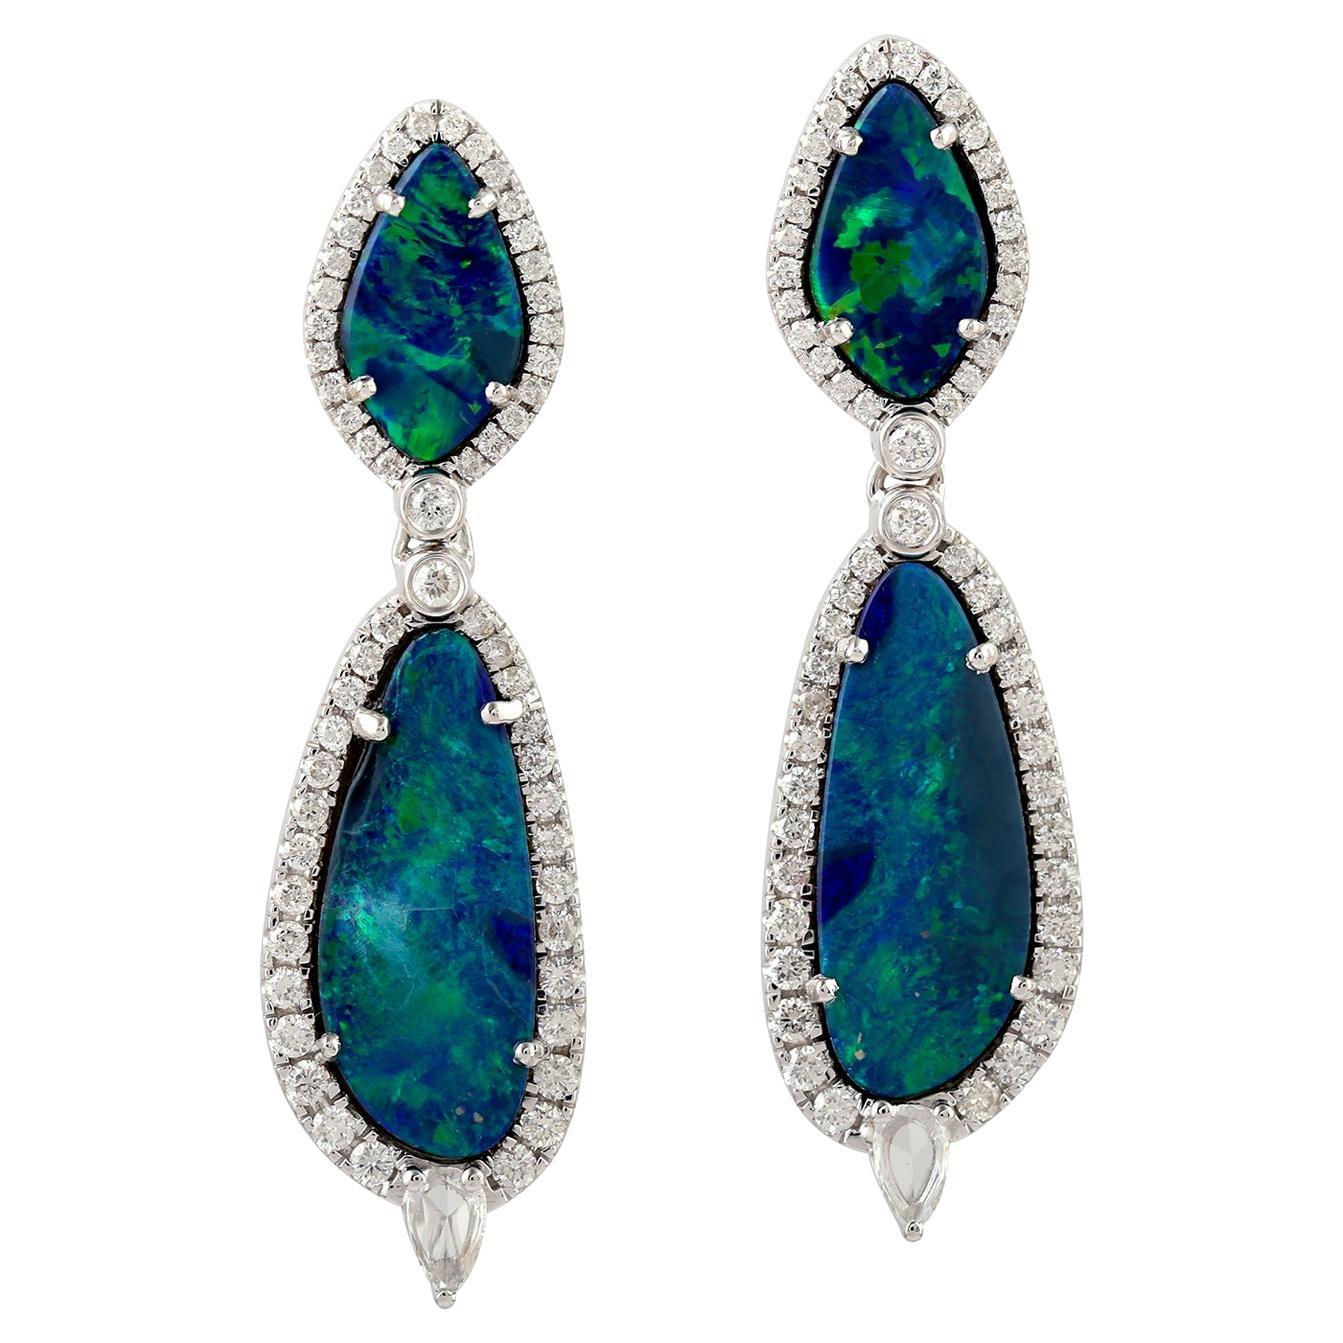 7.38 ct Opal Dangle Earrings With Diamonds Made In 18k White Gold For Sale